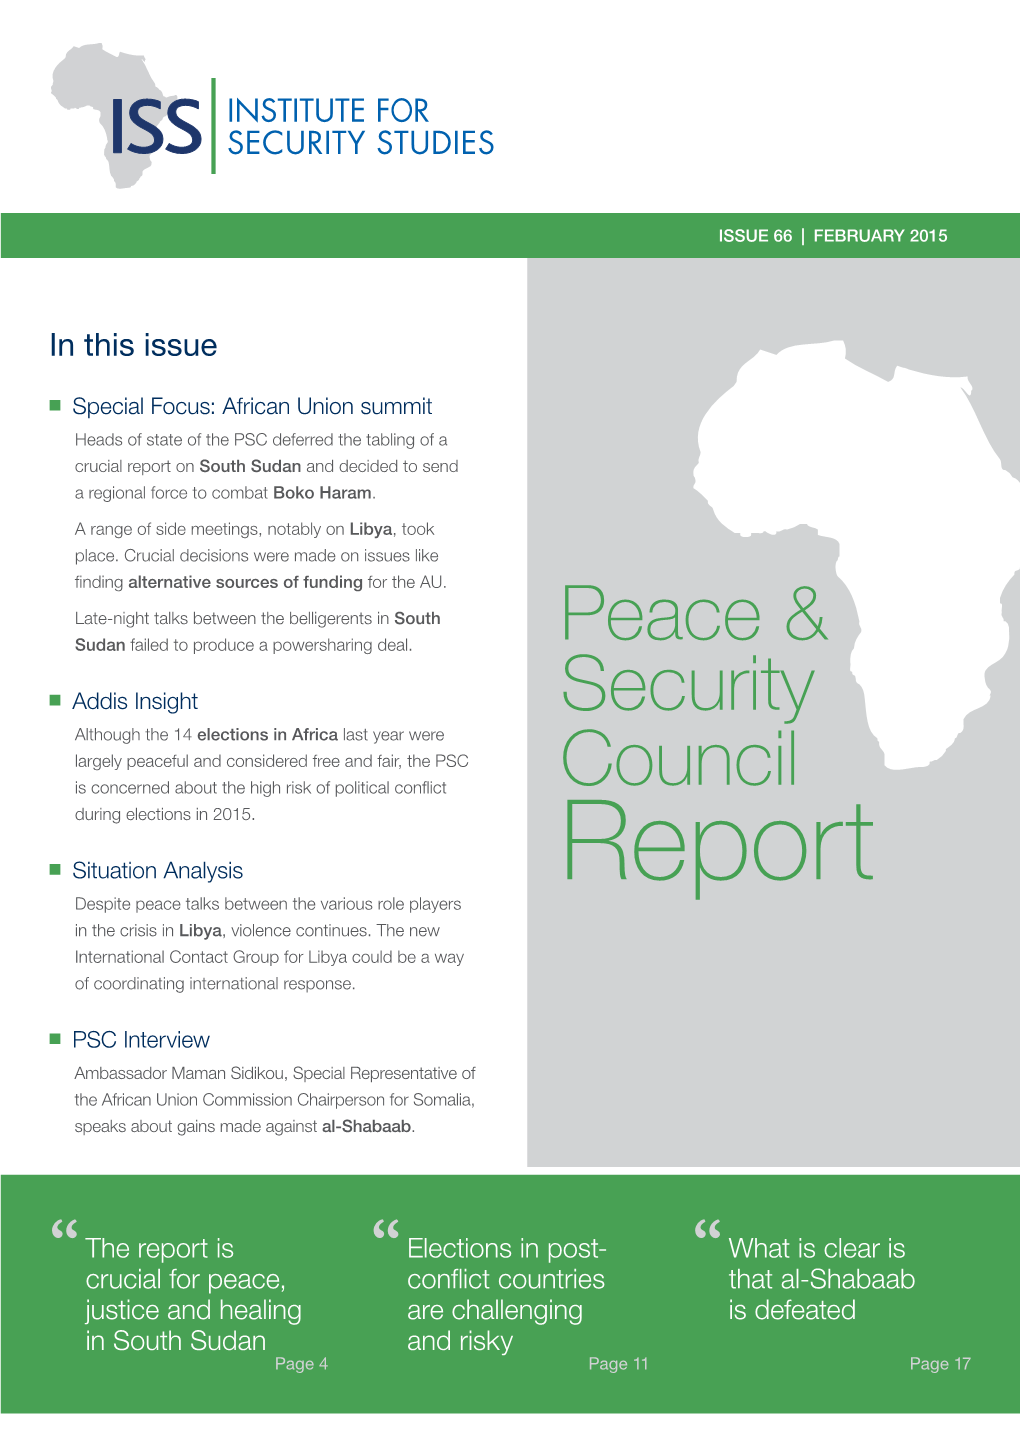 ISS Peace and Security Council Report, No 66